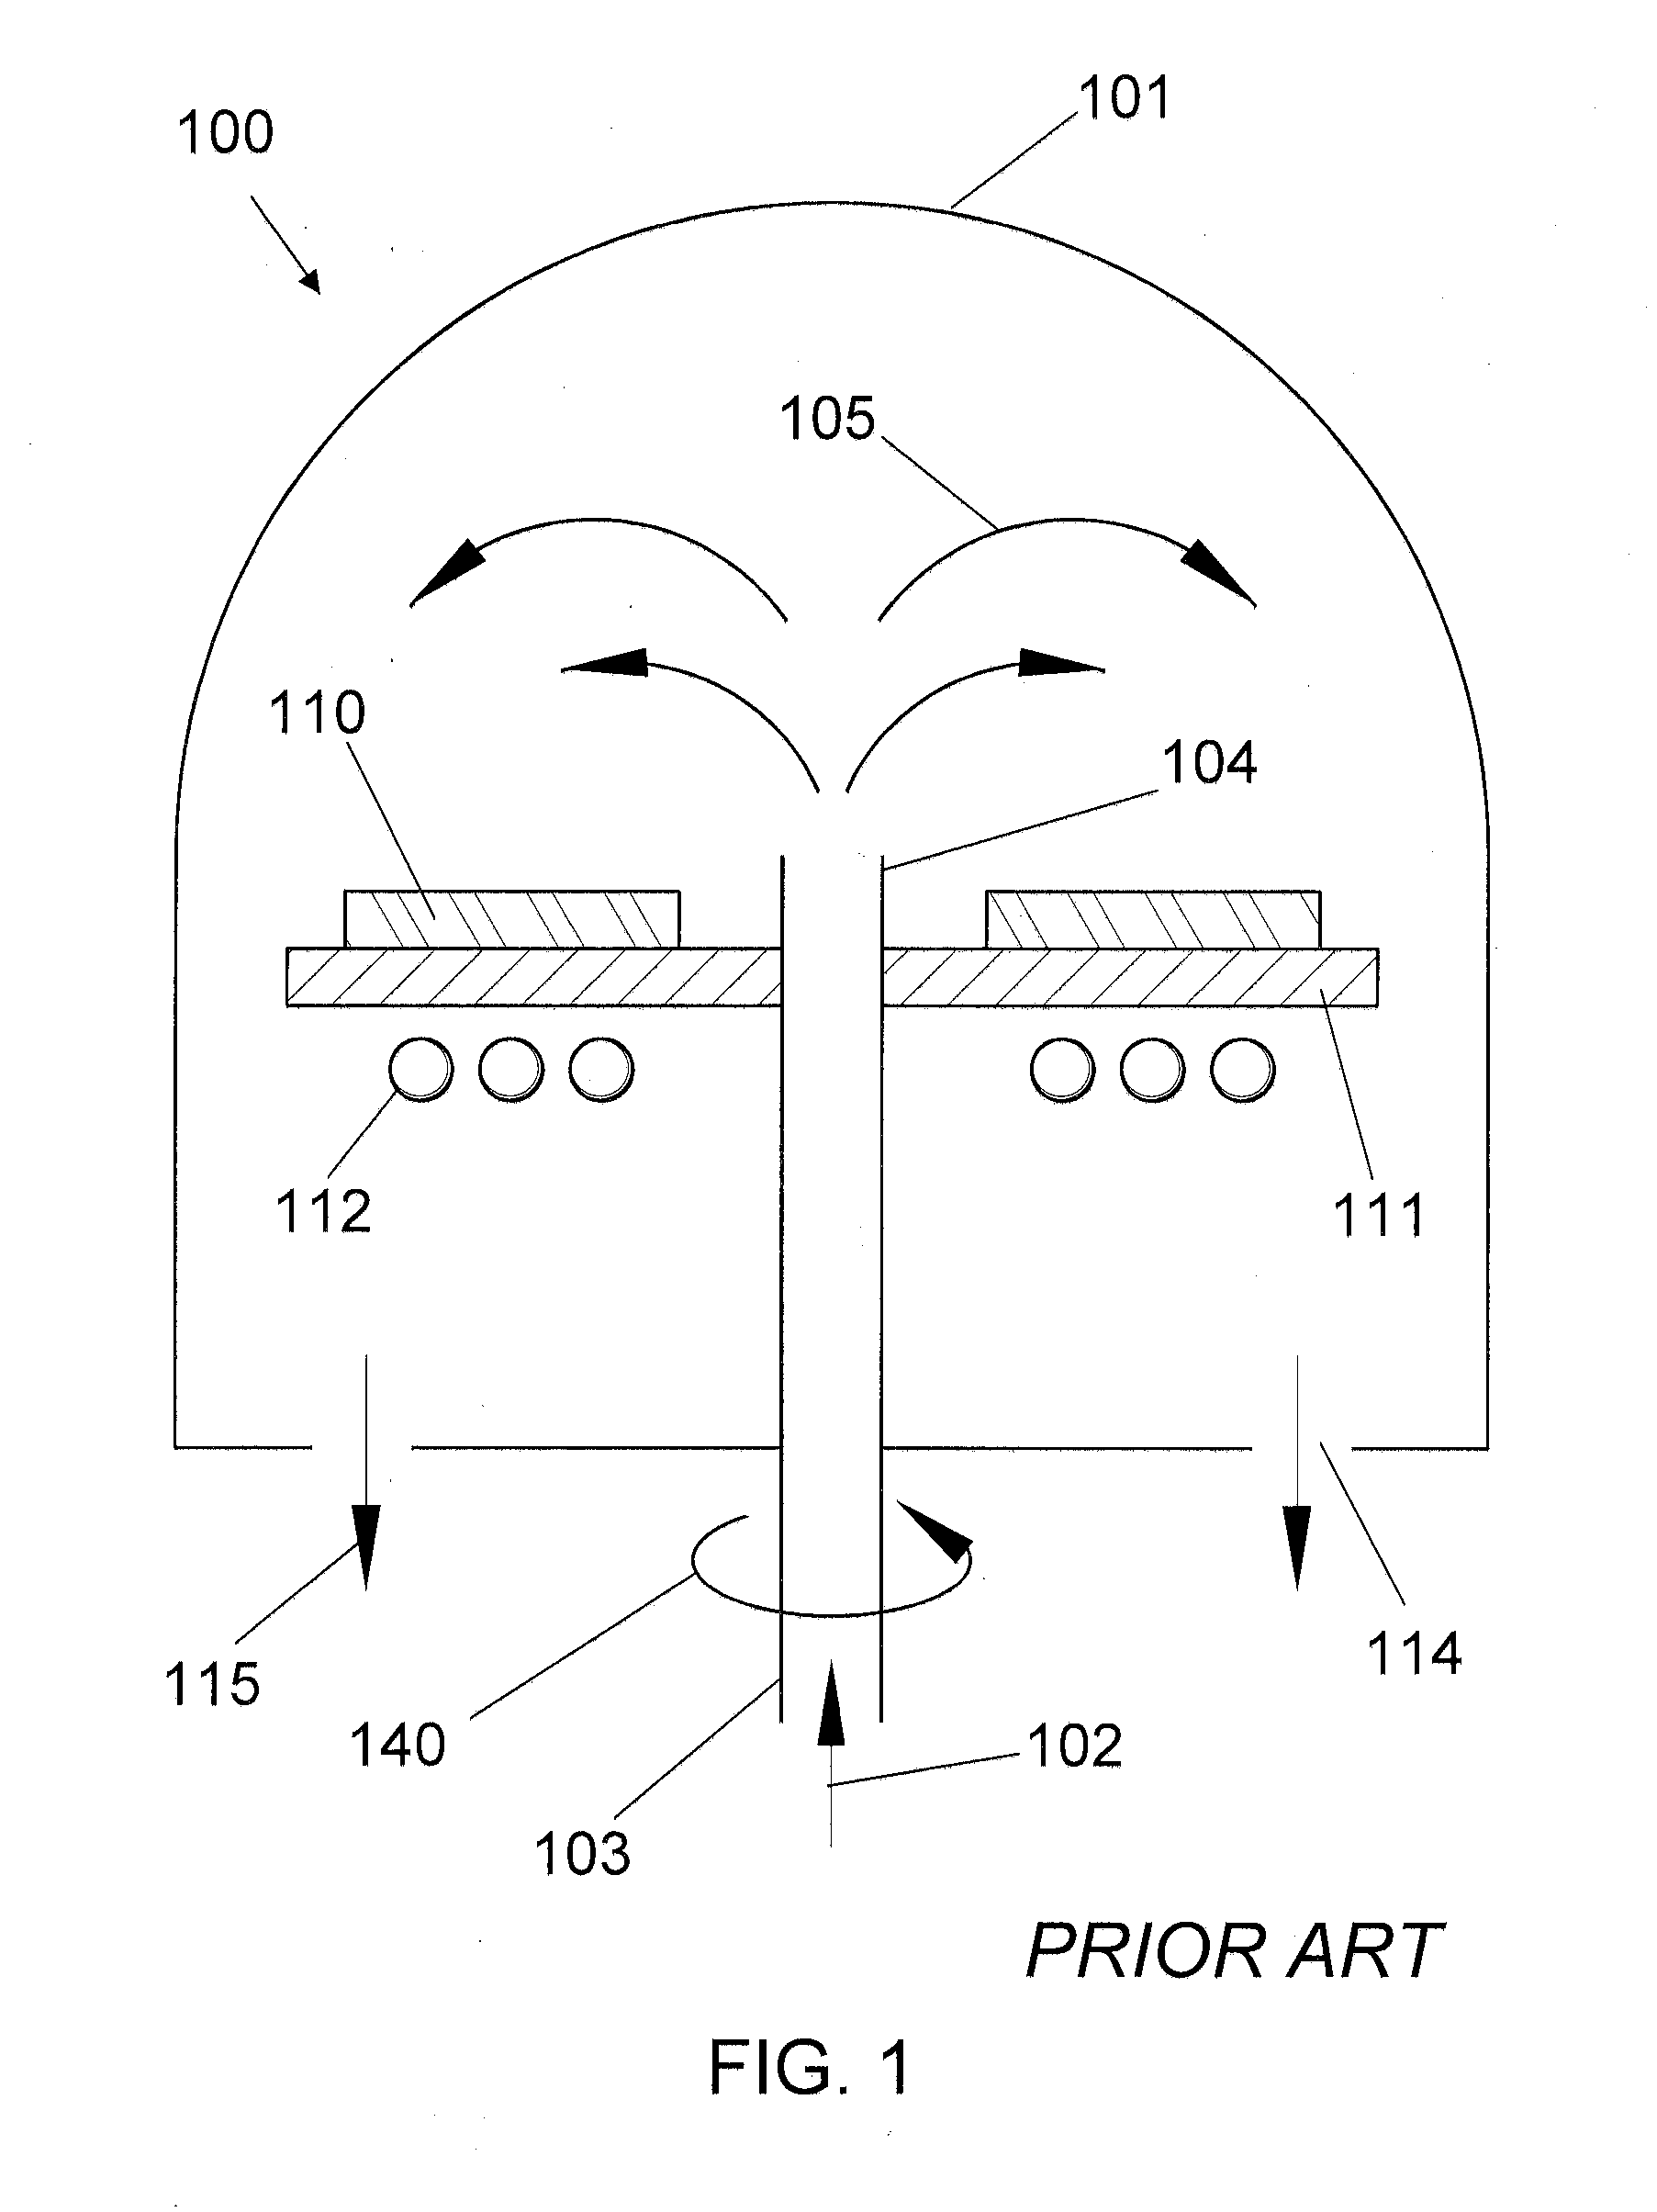 High throughput epitaxial deposition system for single crystal solar devices